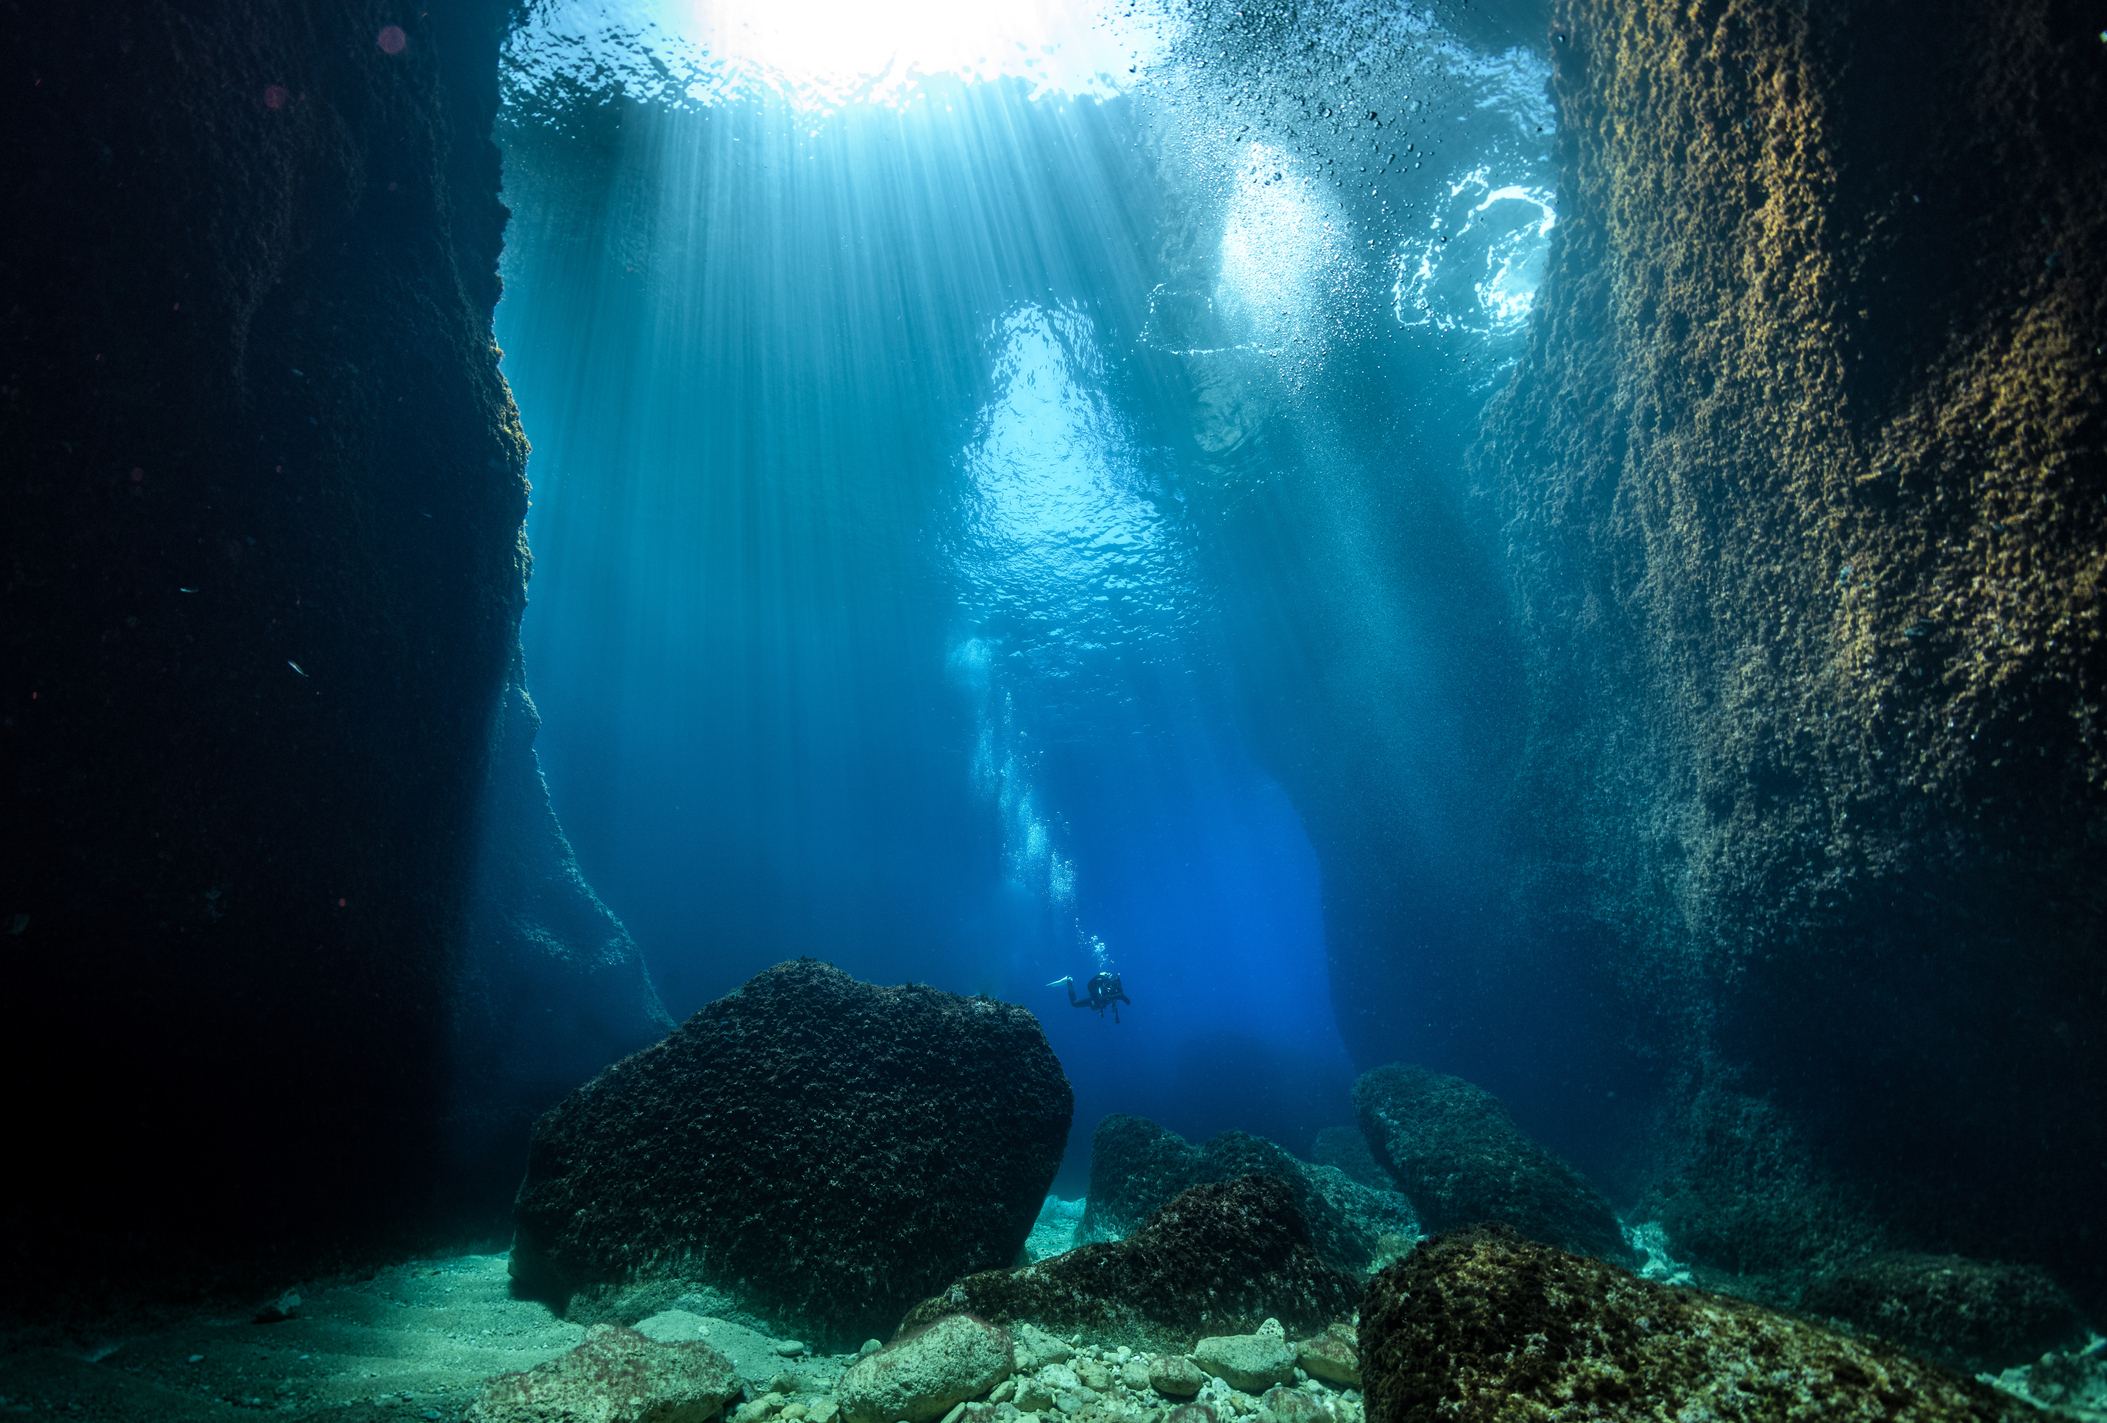 Underwater view of a scuba diver exploring between two large rocks with sunlight piercing through the water from above